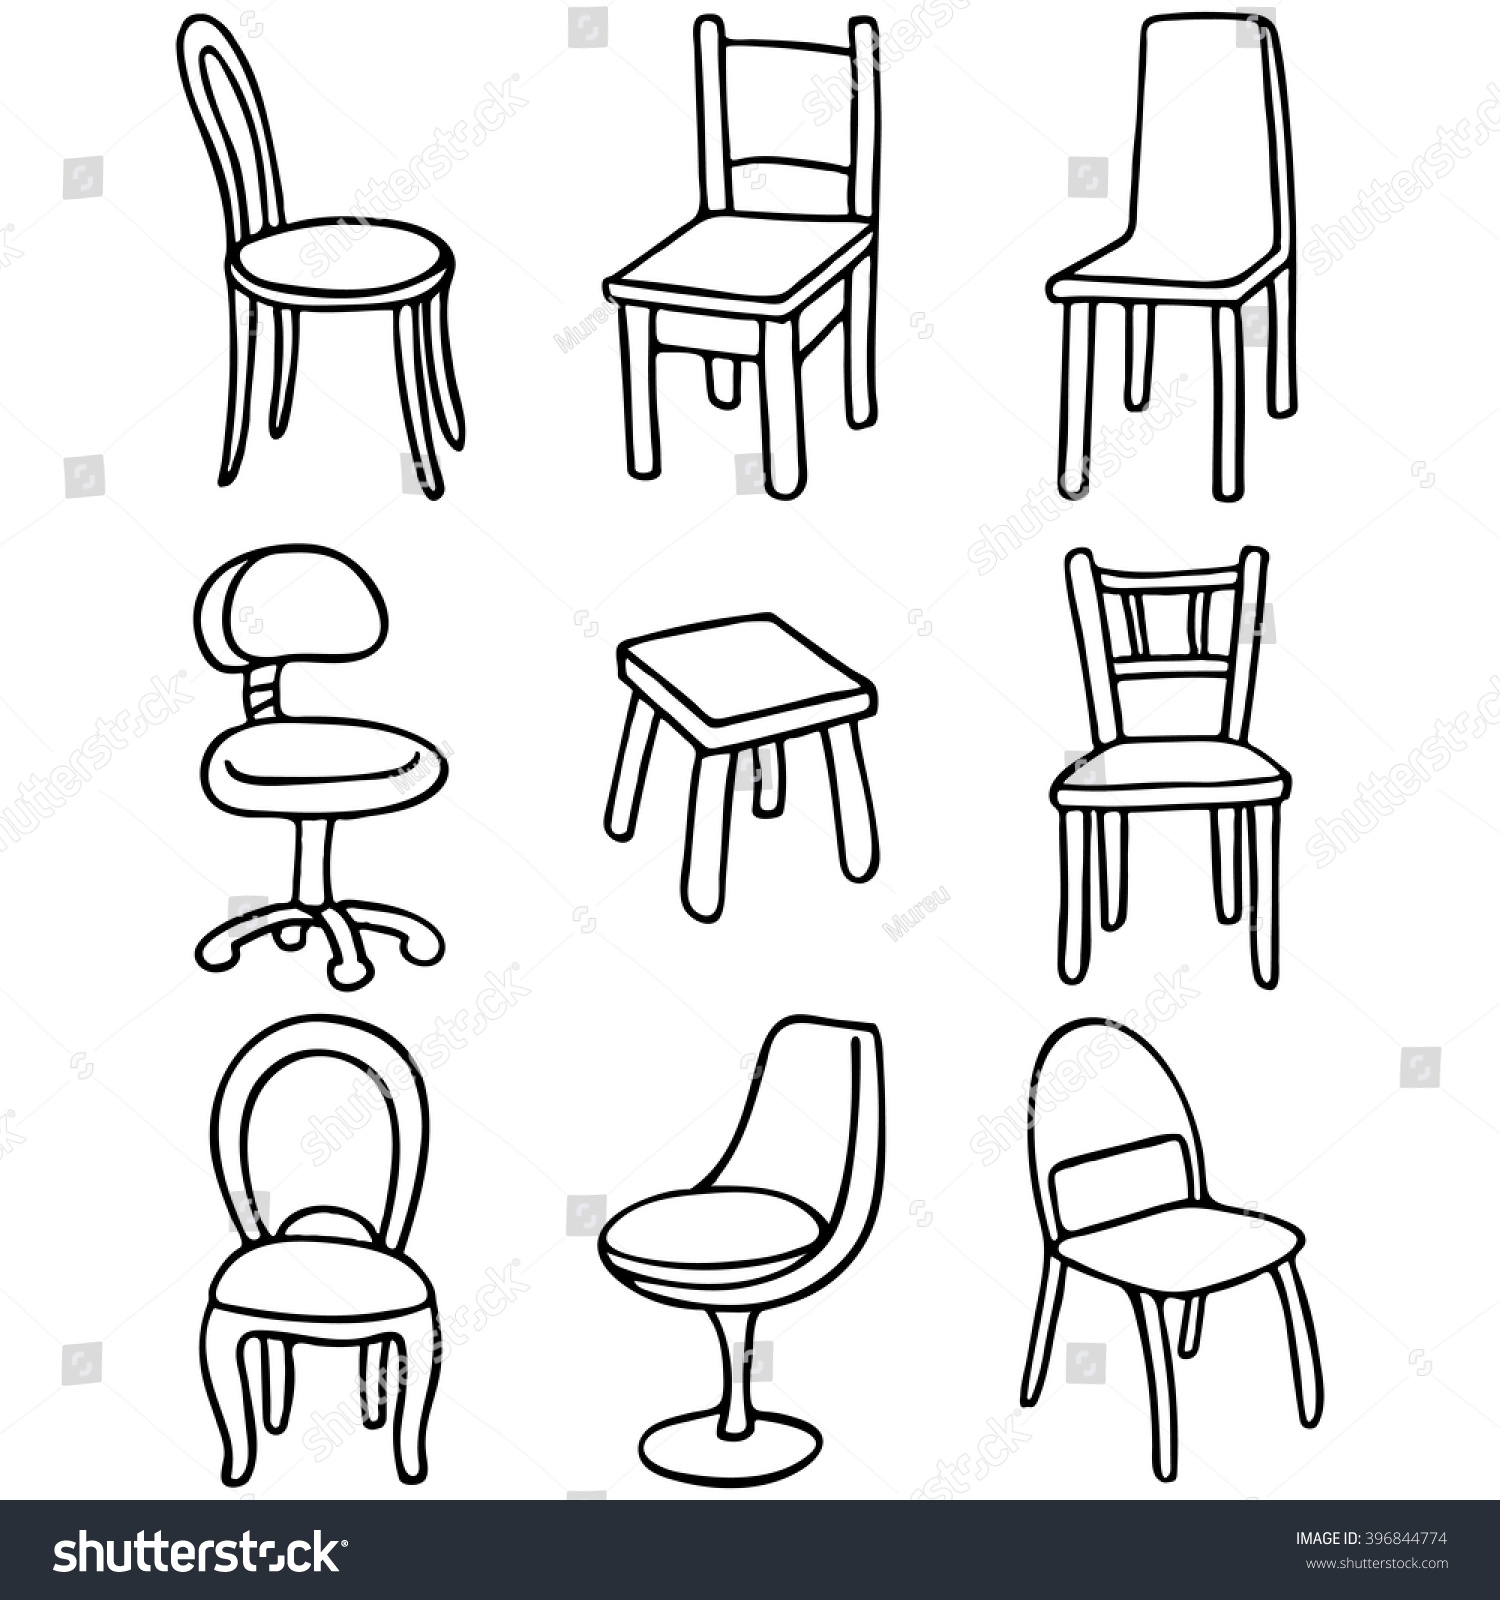 Set Chairs Set Simple Line Drawings Stock Vector 396844774 - Shutterstock